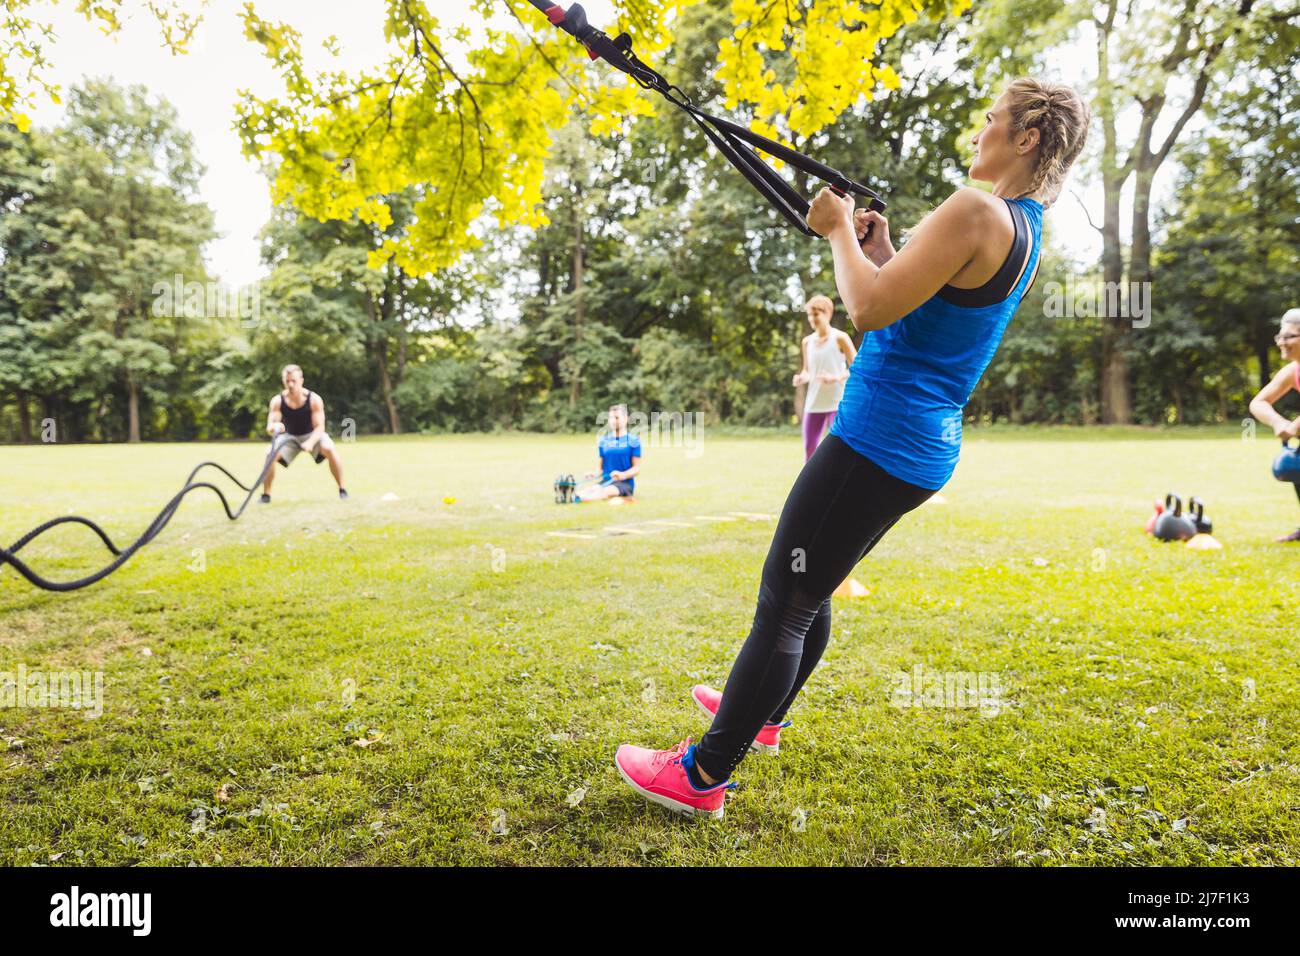 Young woman working out with elastic band in park Stock Photo